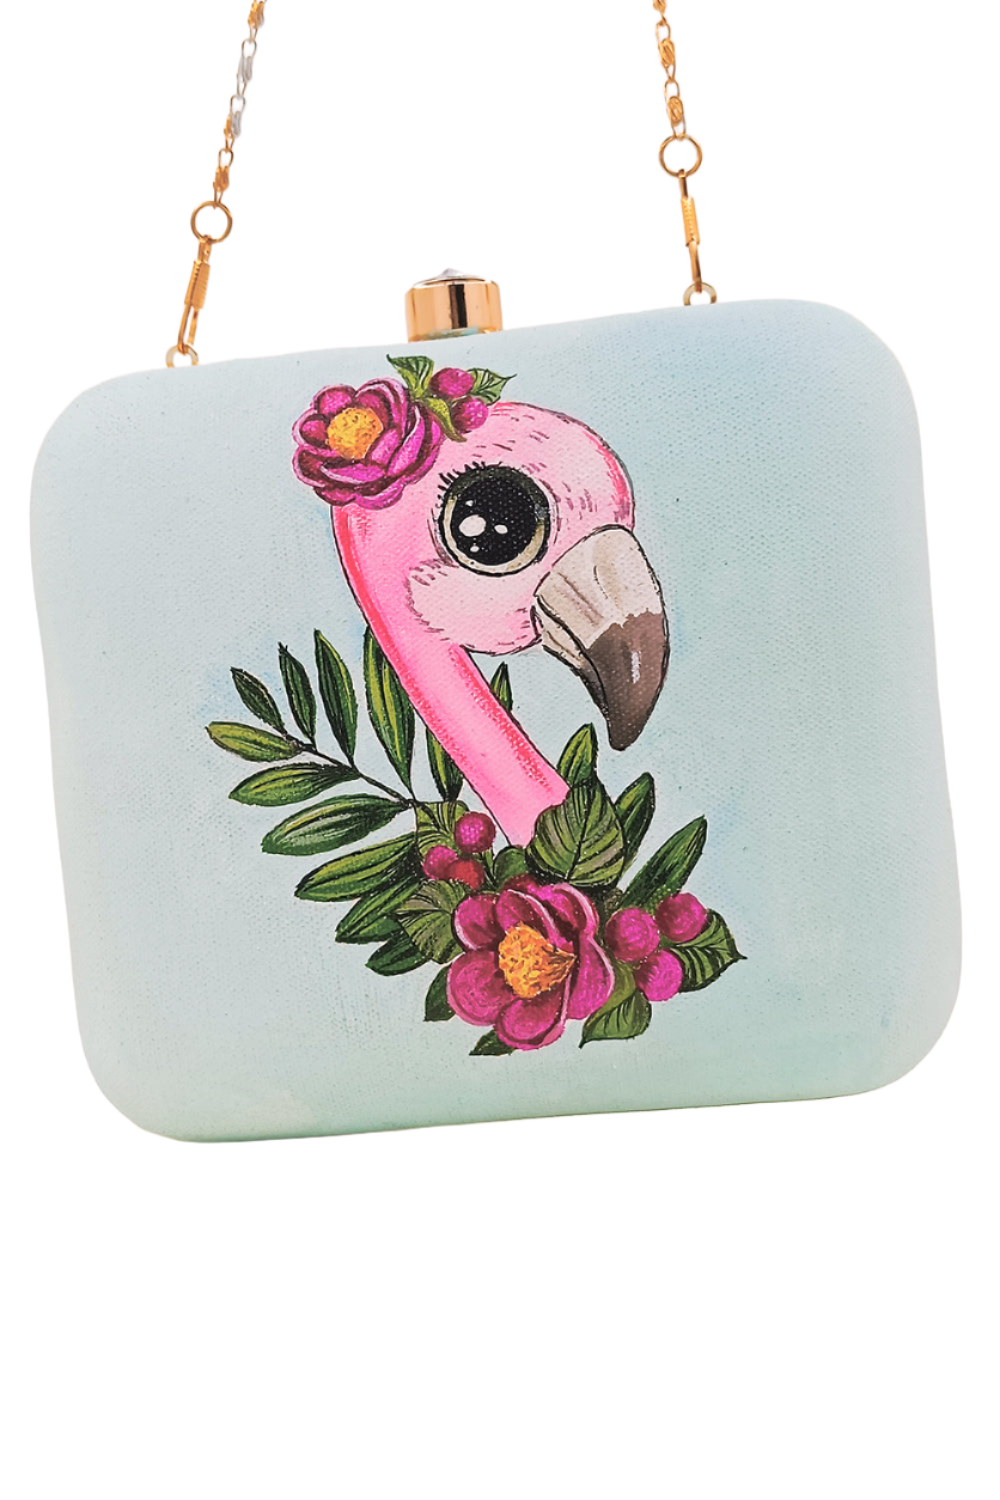 HAND PAINTED FLAMINGO CLUTCH